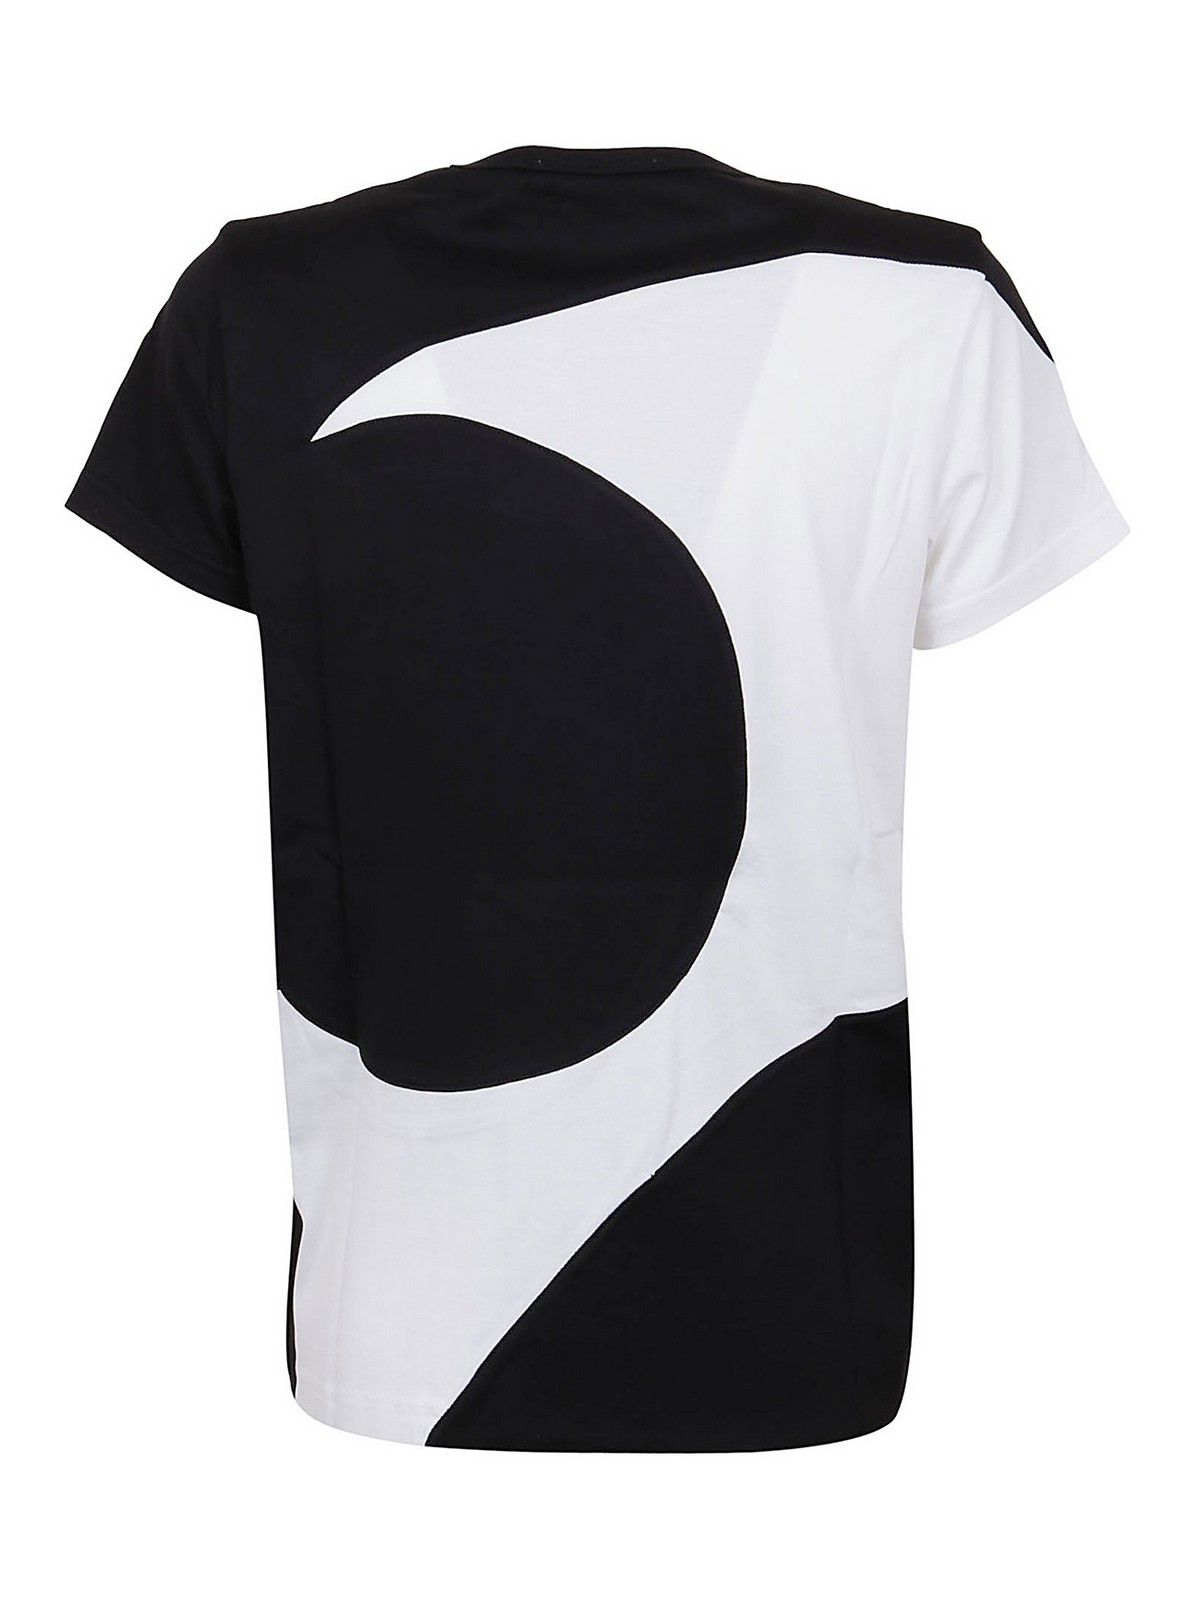 black and white givenchy shirt